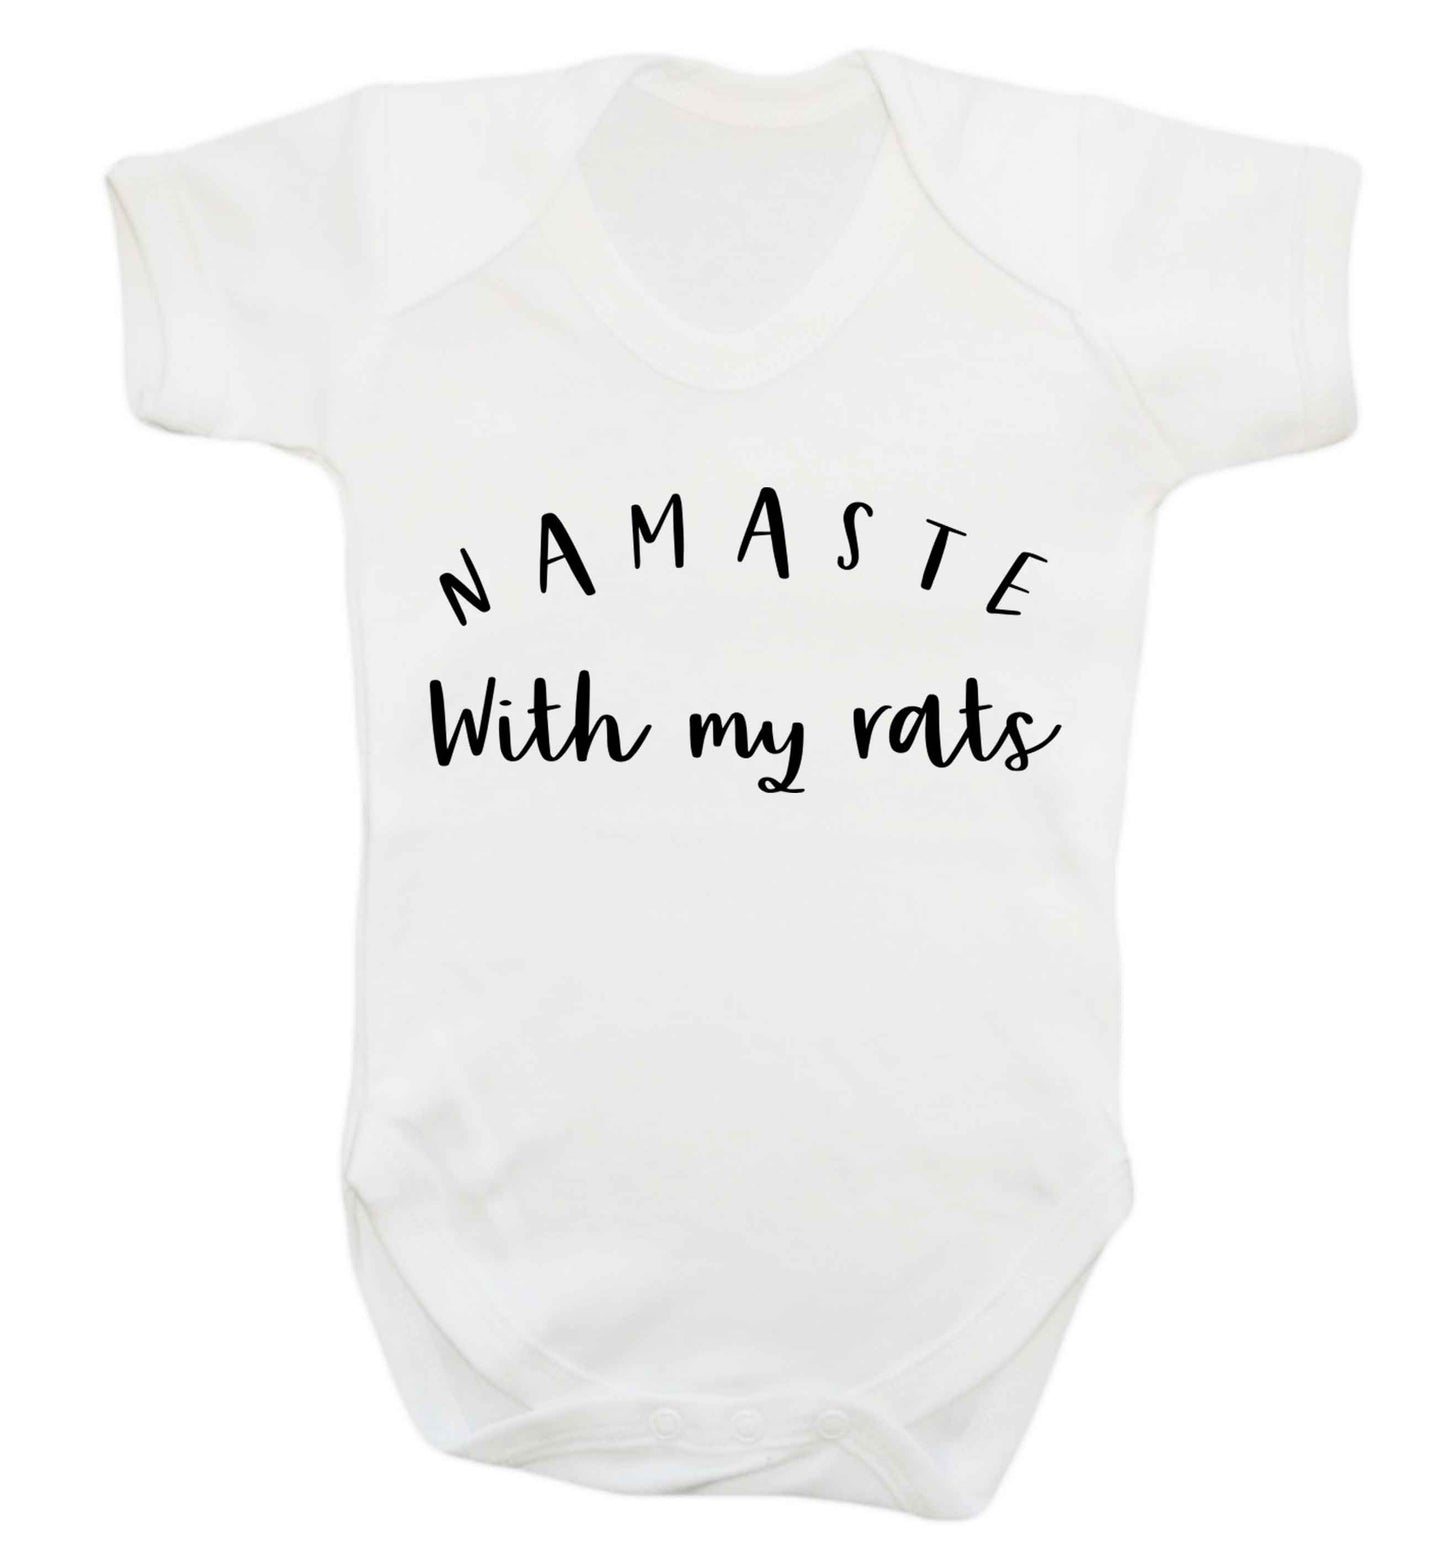 Namaste with my rats Baby Vest white 18-24 months